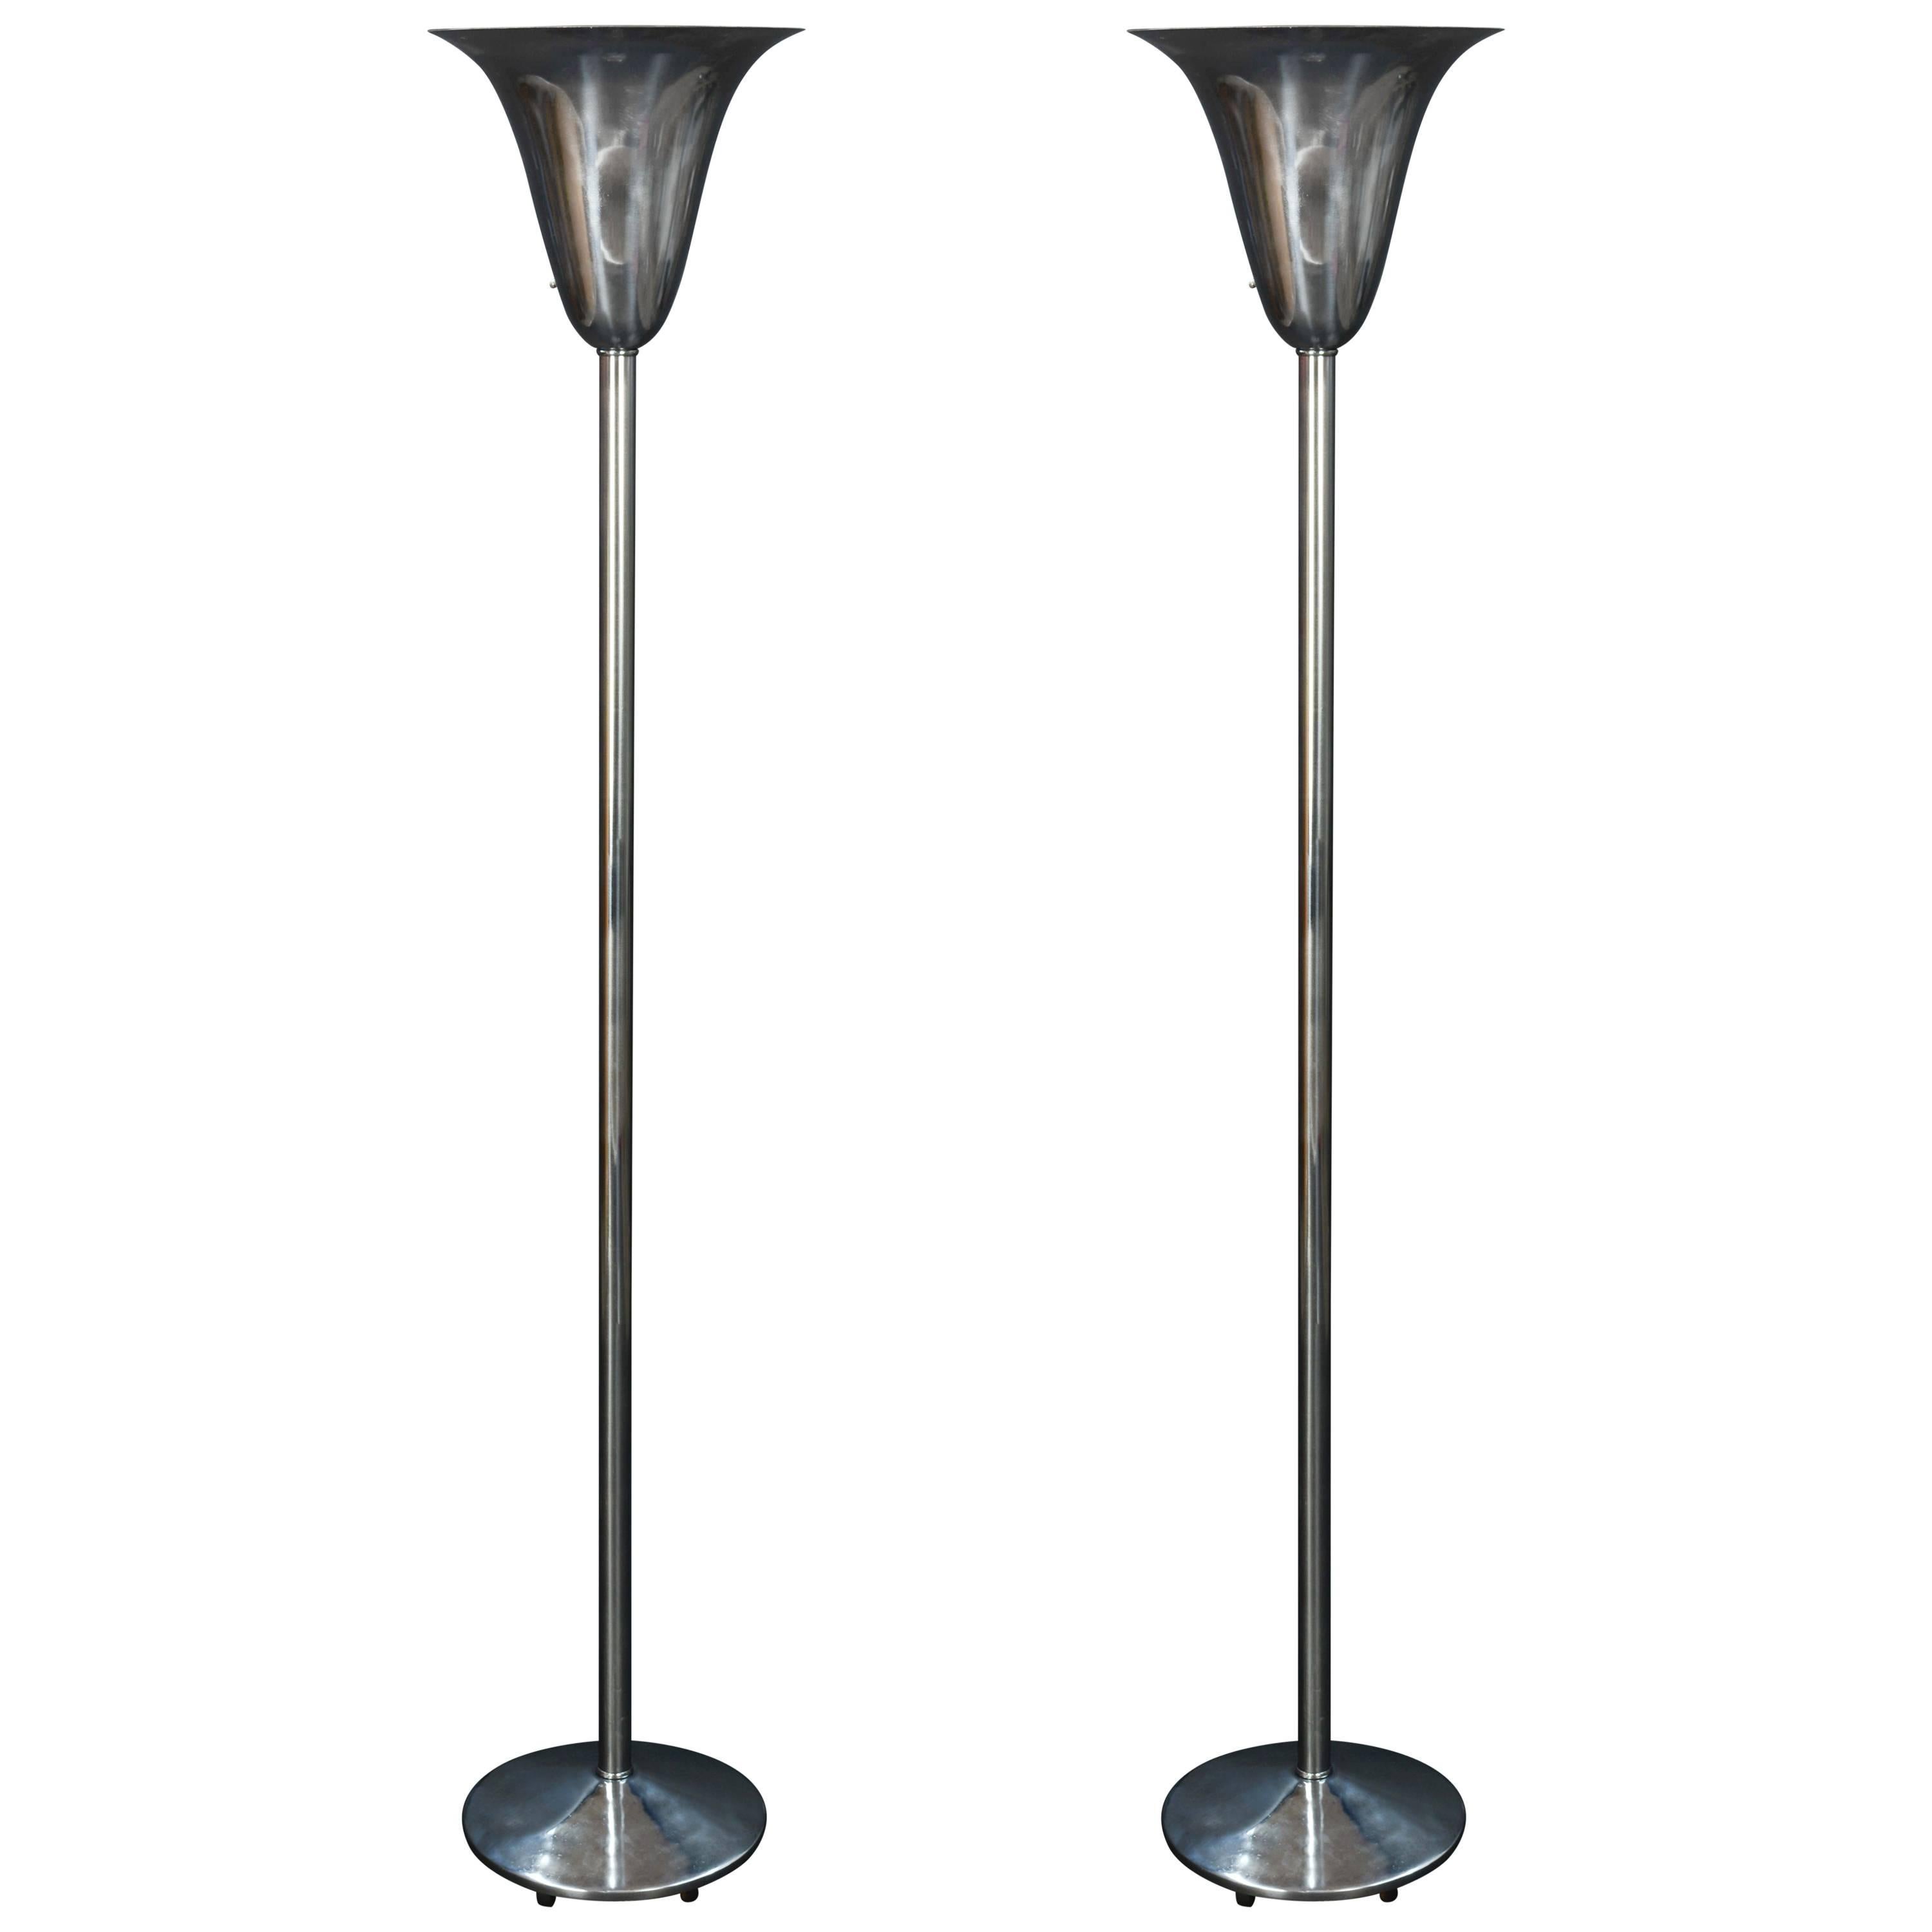 Pair of Polished 1930s Art Deco Fluted Torchieres after Norman Bel Geddes For Sale